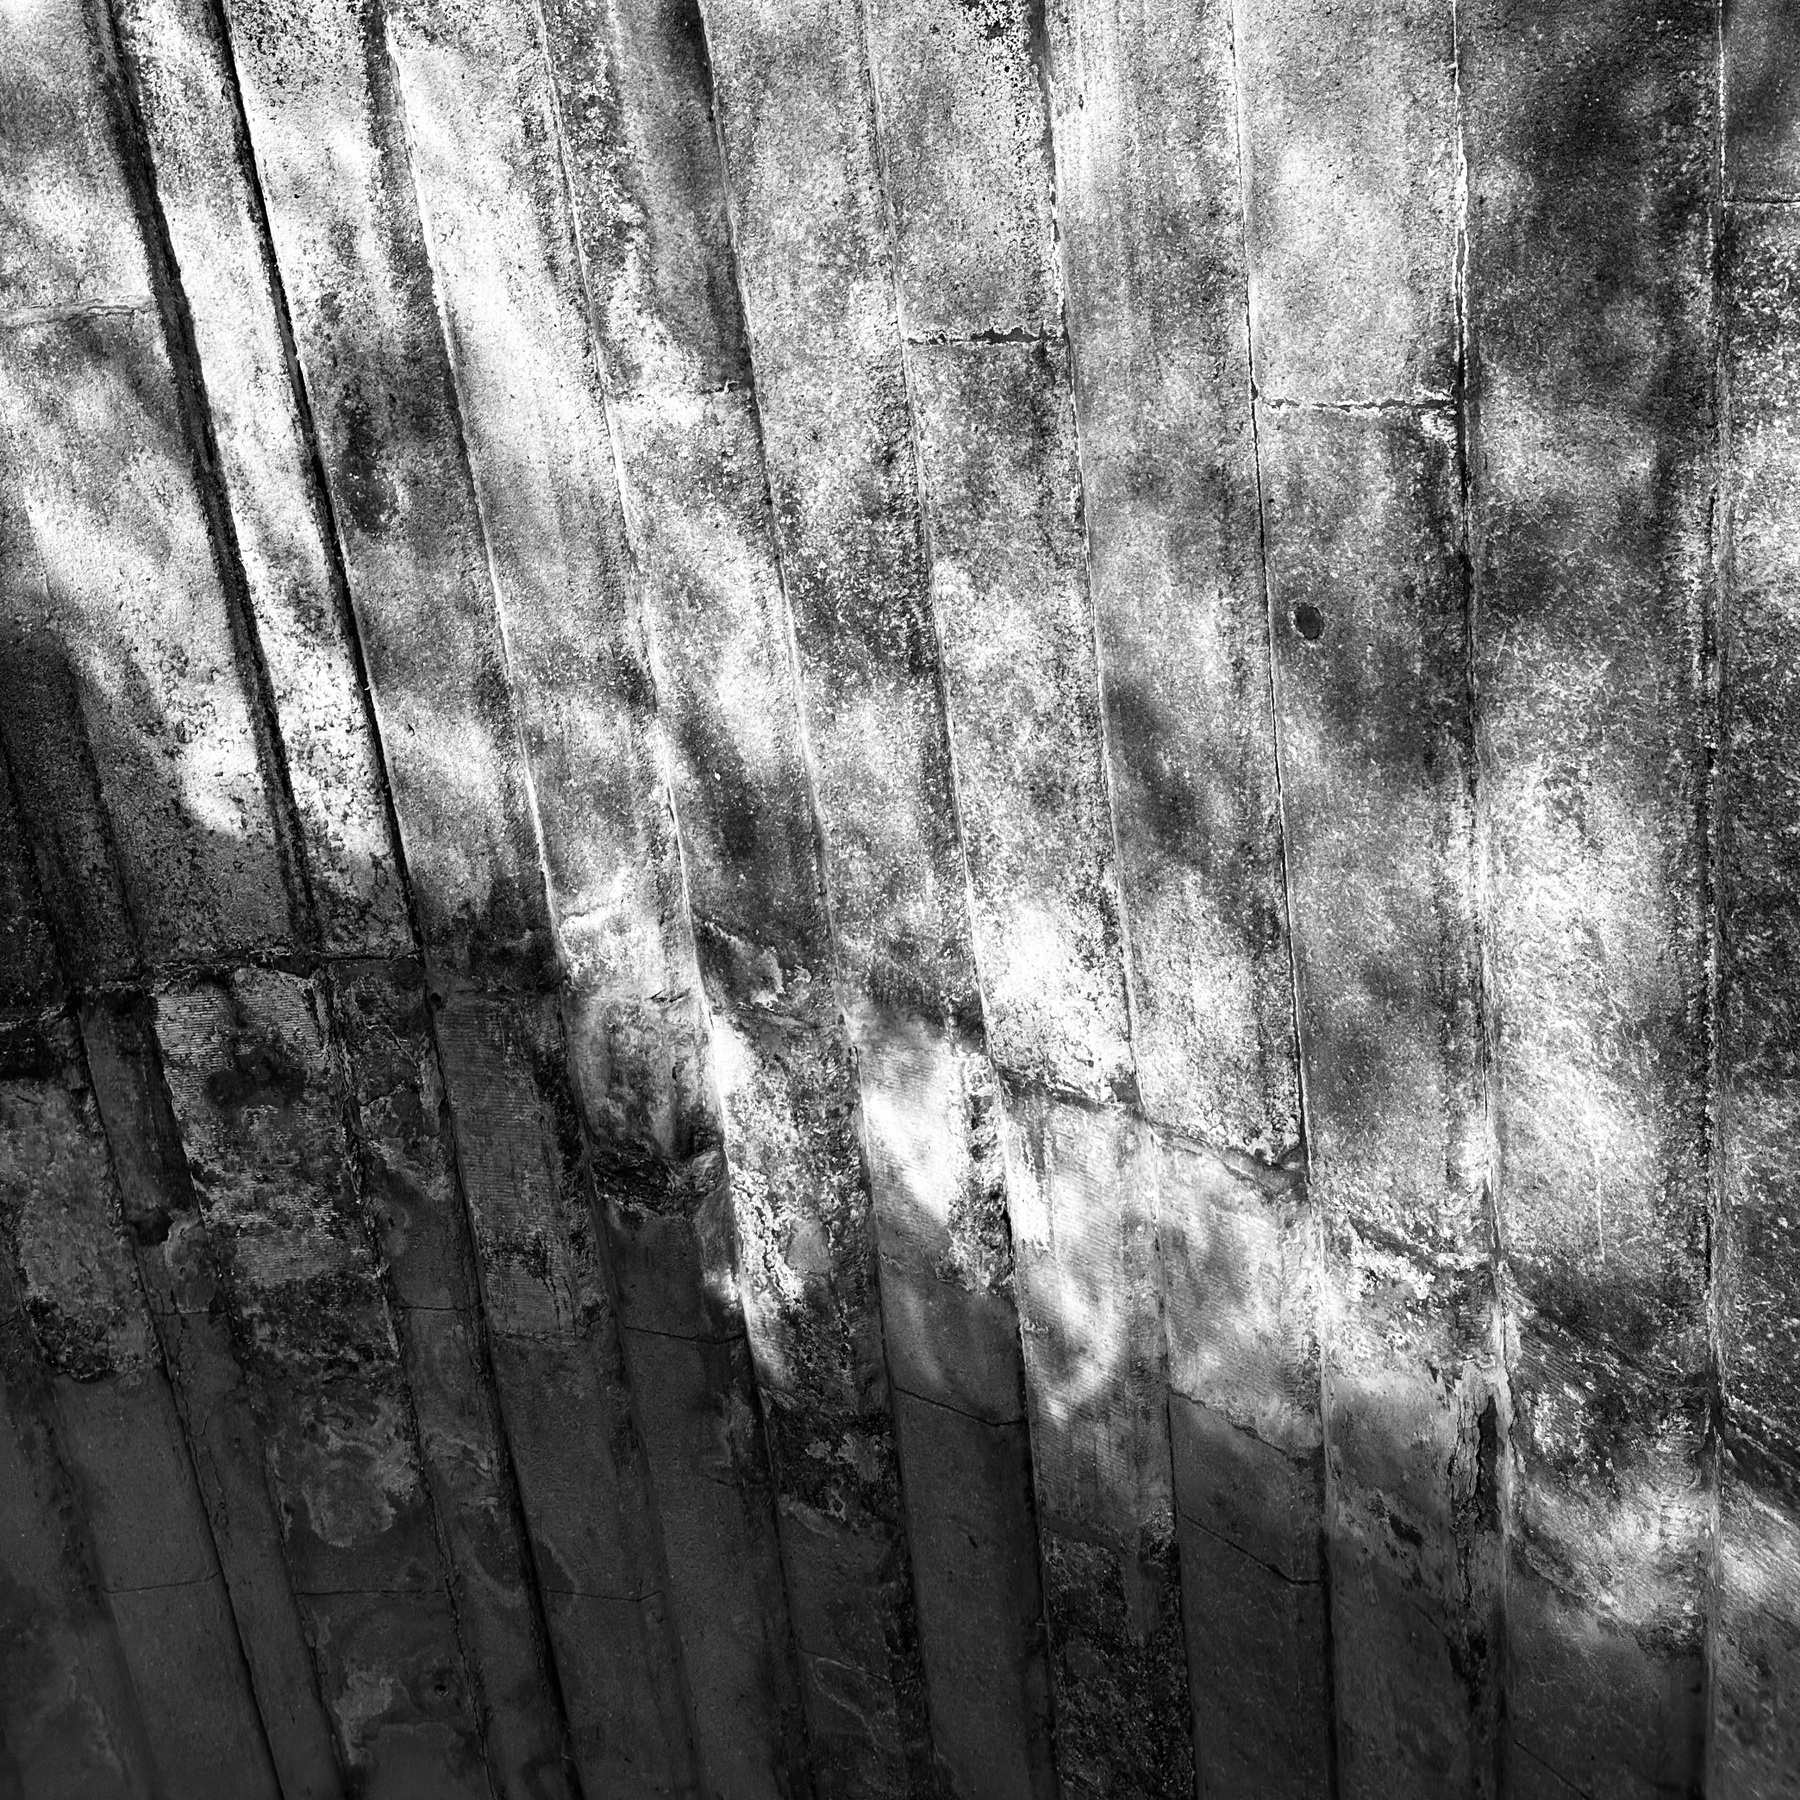 Caustics on the underside of a brick arched bridge, from sunlight reflecting off the river the bridge crosses.